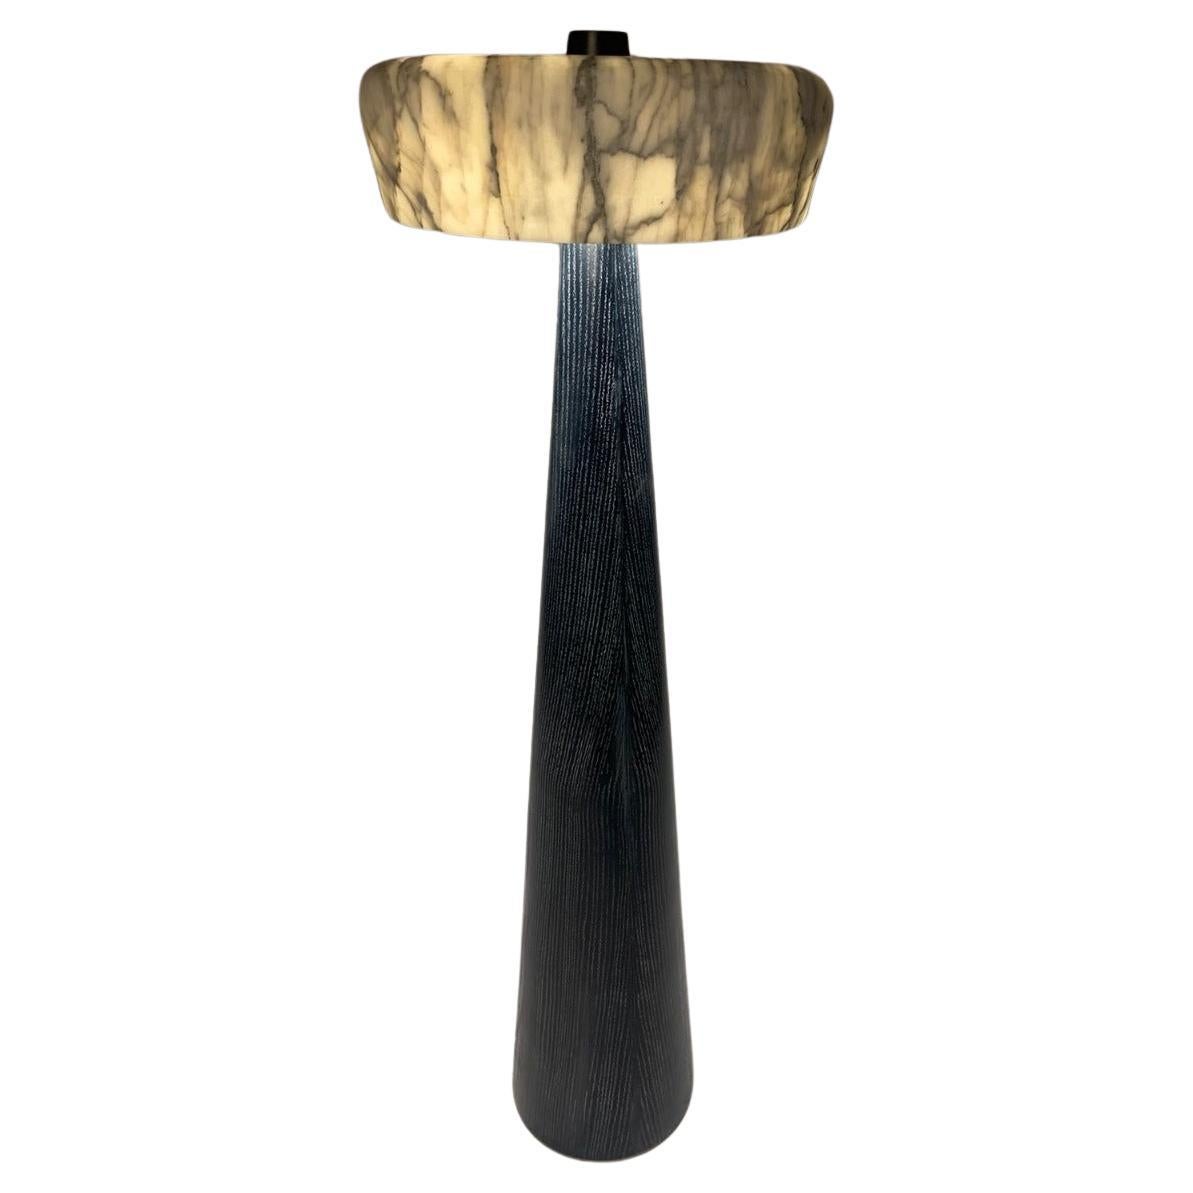 TOTEM floor lamp with. Carrara lampshade. Handmade in Egypt. For Sale